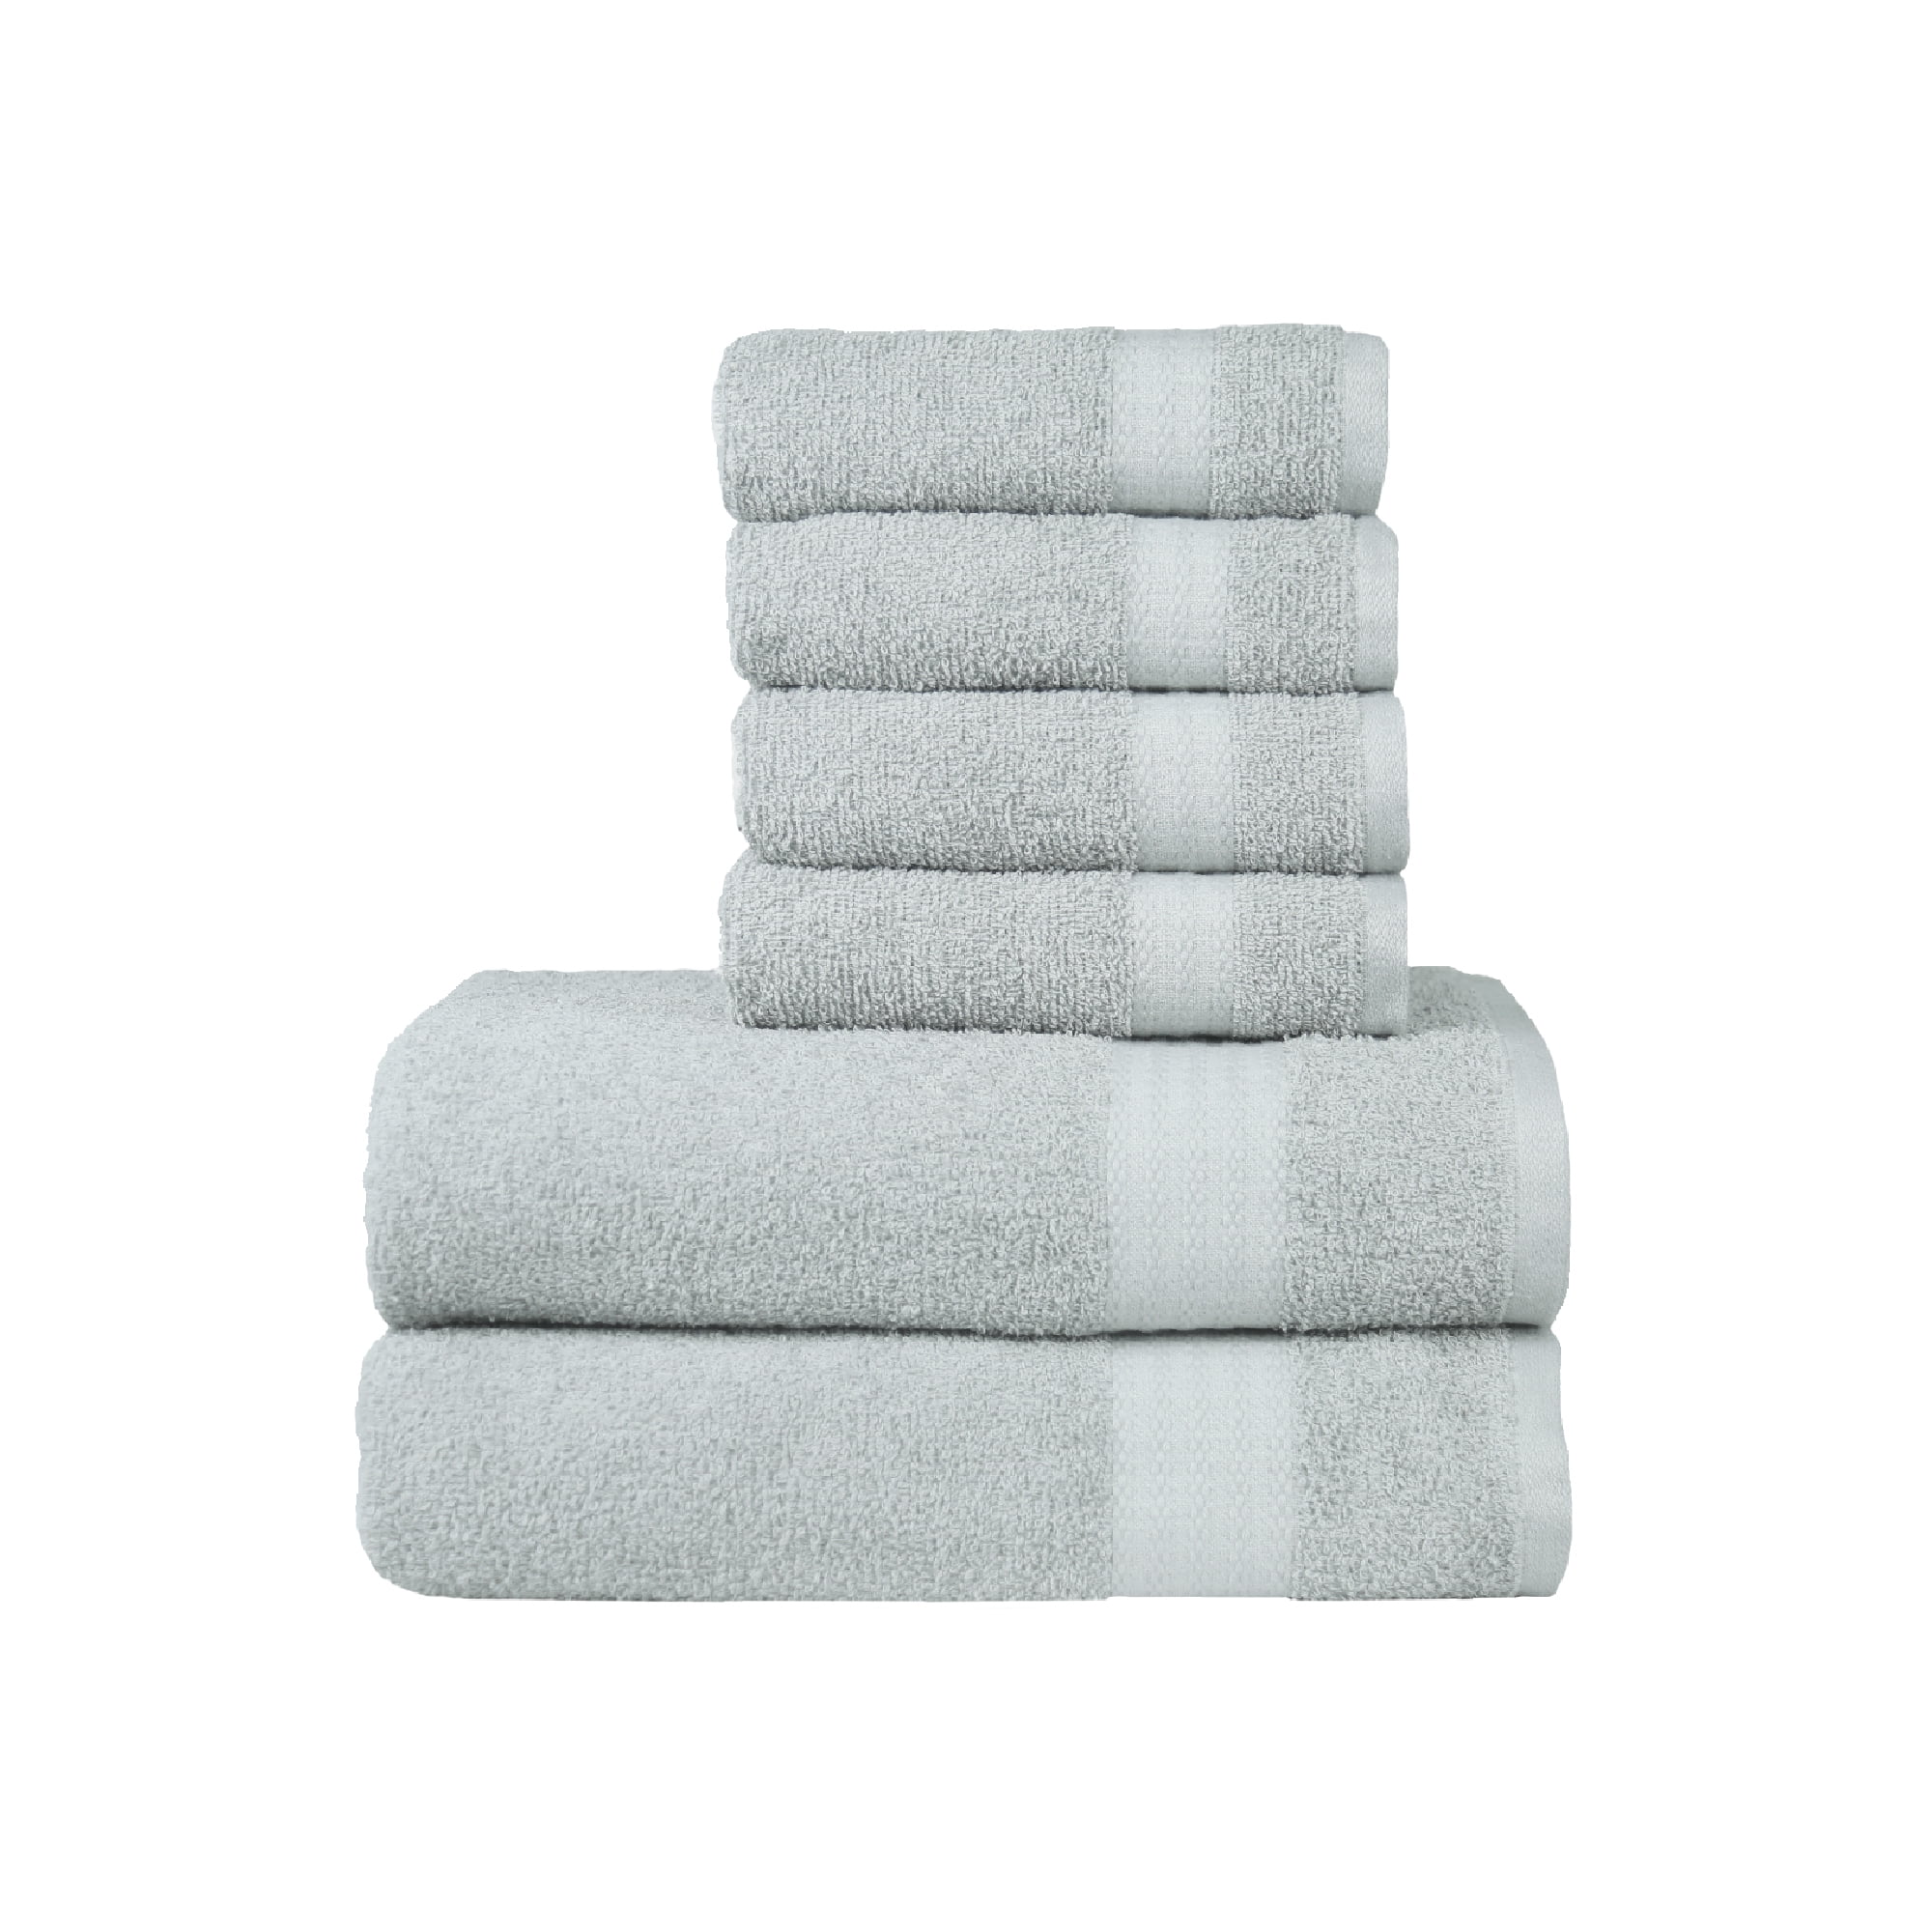  TRIDENT Luxury 6 Piece Towel Set, 2 Bathroom Towels, 2 Hand  Towels, 2 face Cloth, 100% Cotton Fast Dry Towels for Gifting and Home use,  Sky Blue Towel Sets : Home & Kitchen